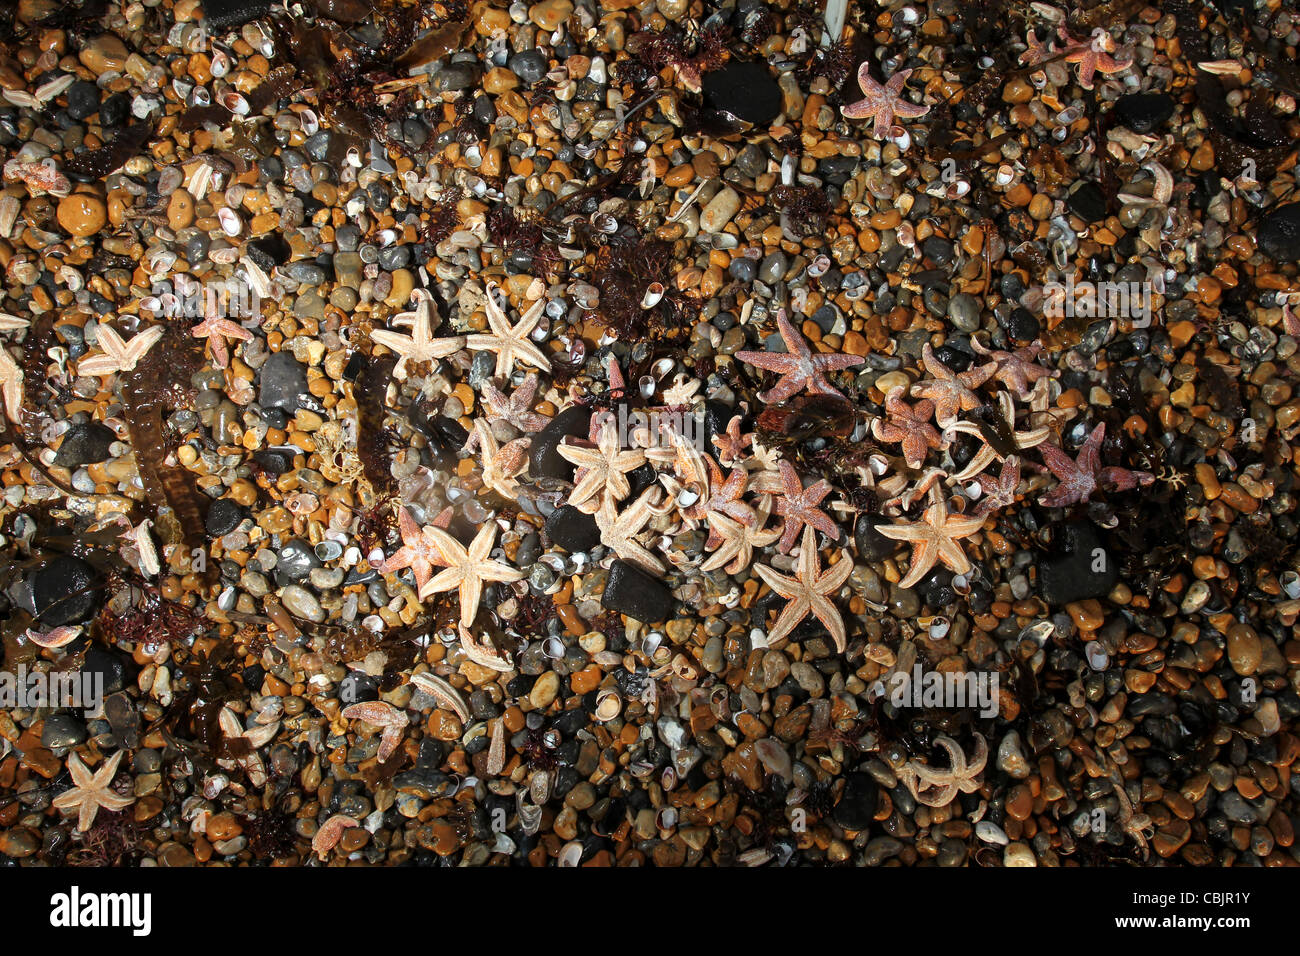 A large group of Starfish pictured washed up on Brighton Beach, East Sussex, UK. Stock Photo